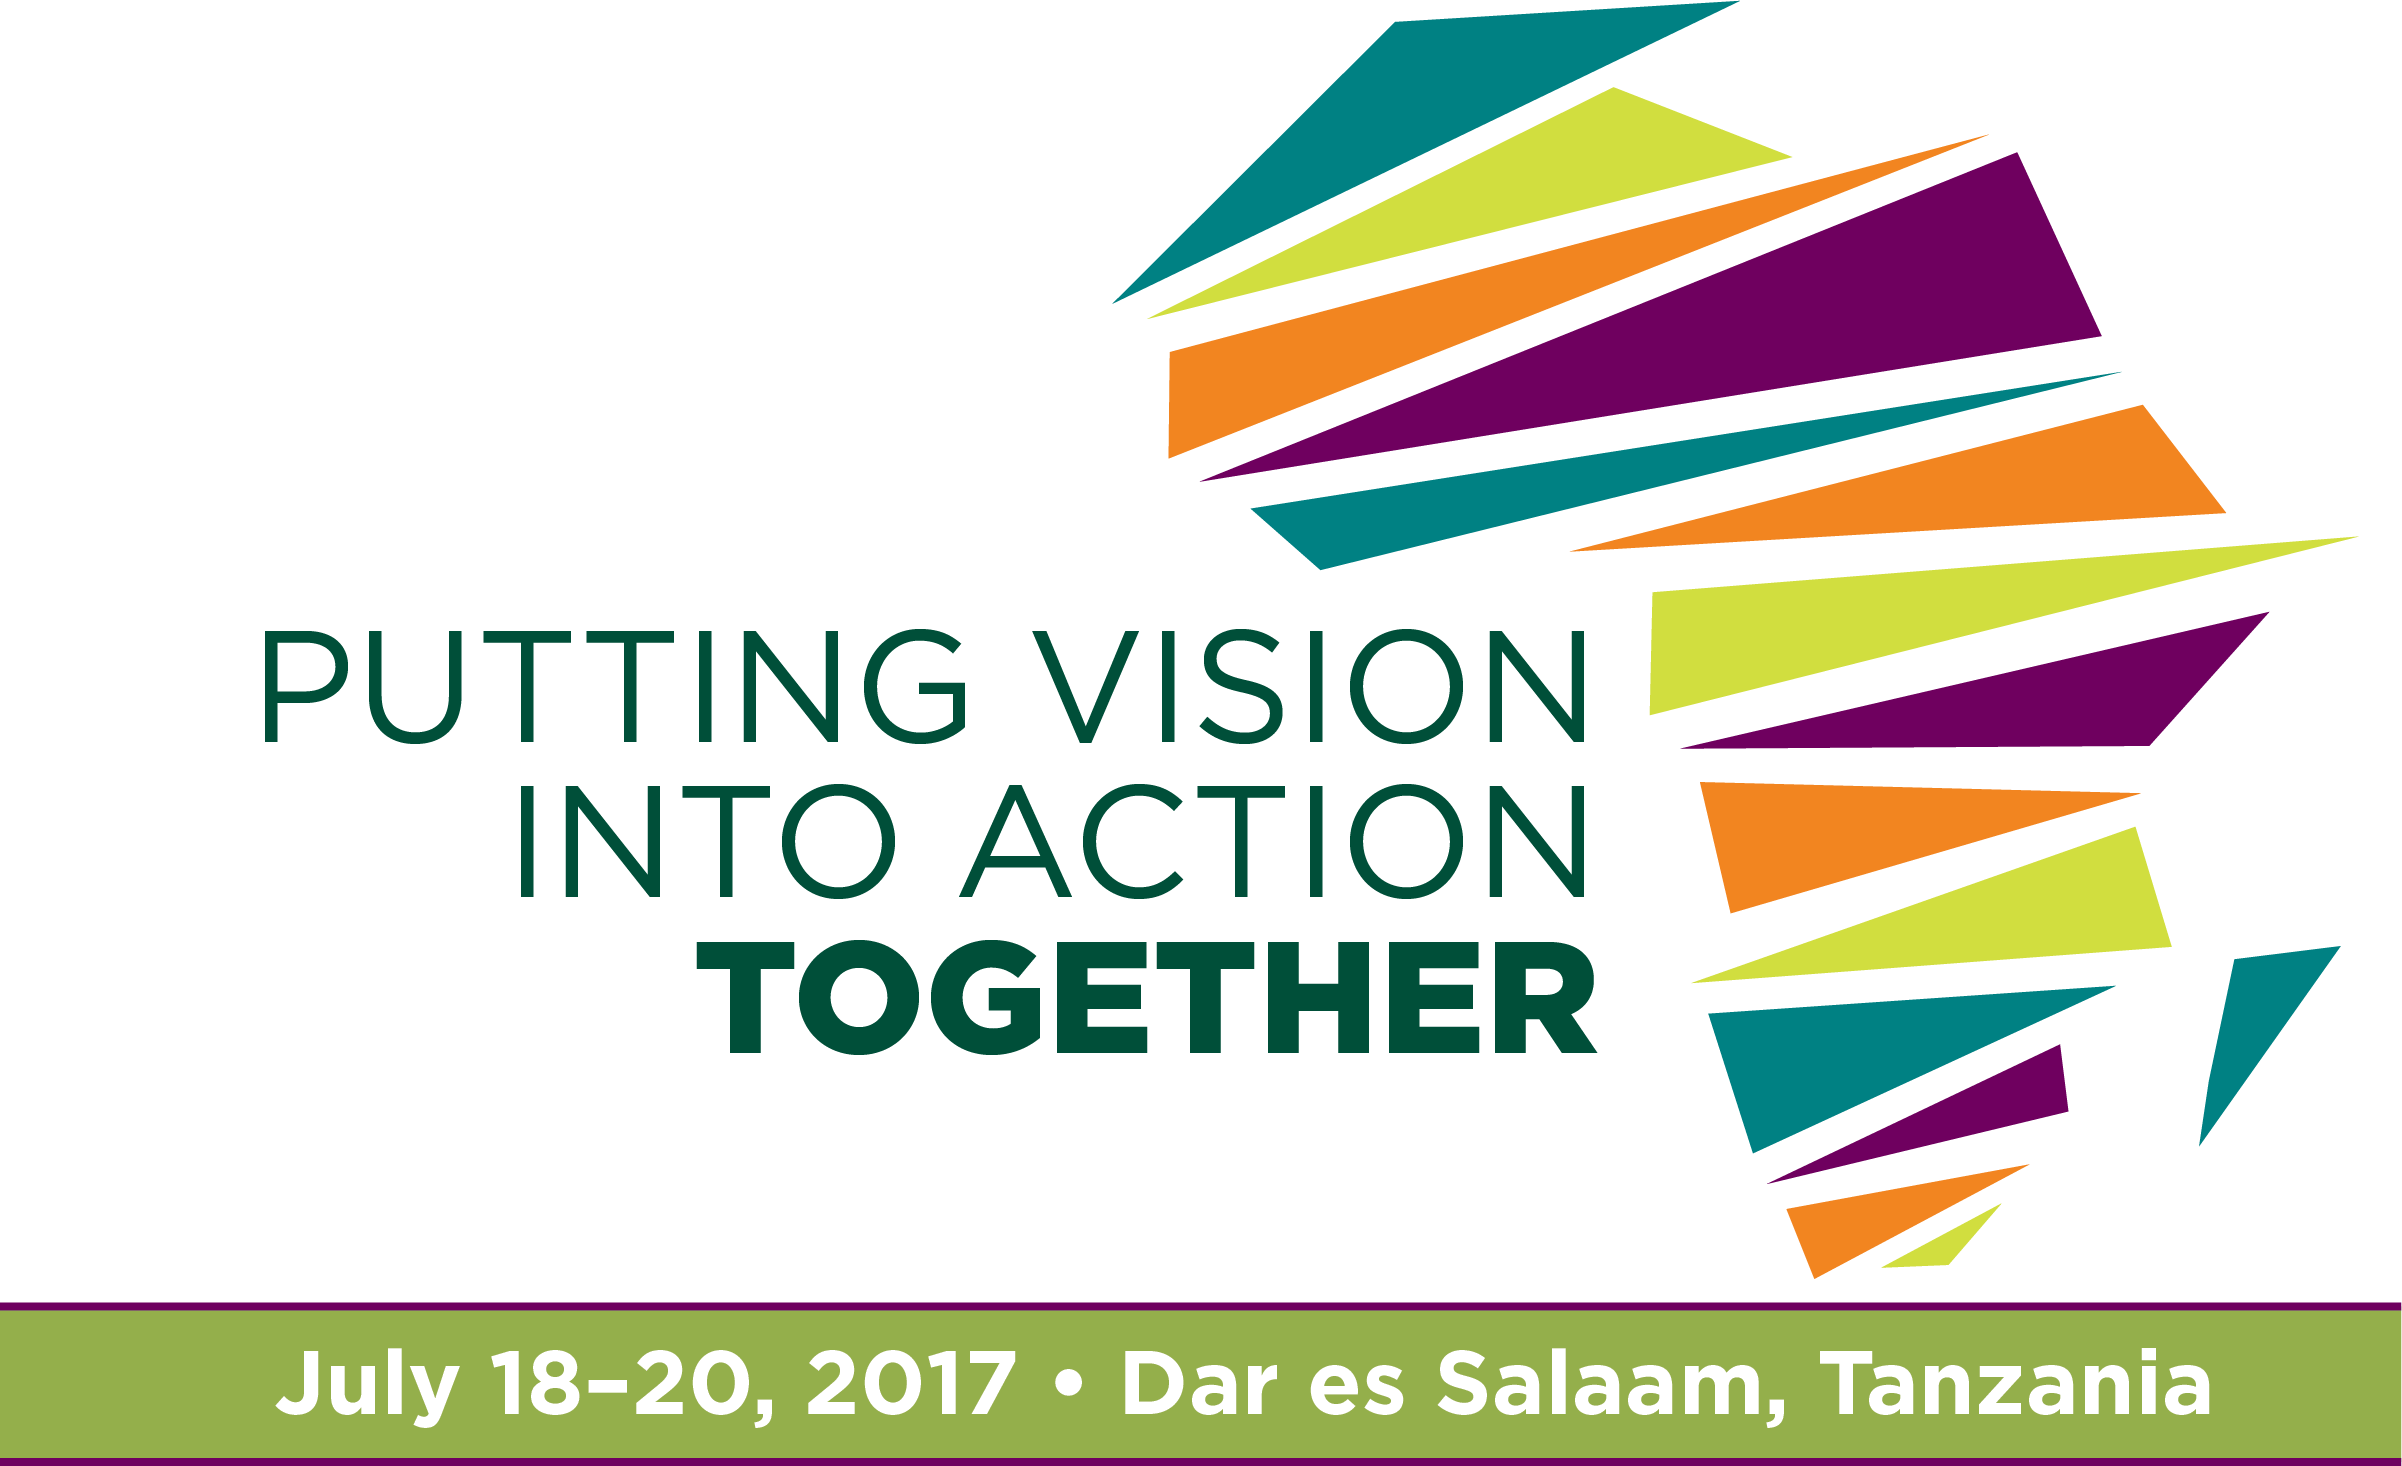 putting vision into action. together. July 18-20, 2017. Dar es Salaam, Tanzania